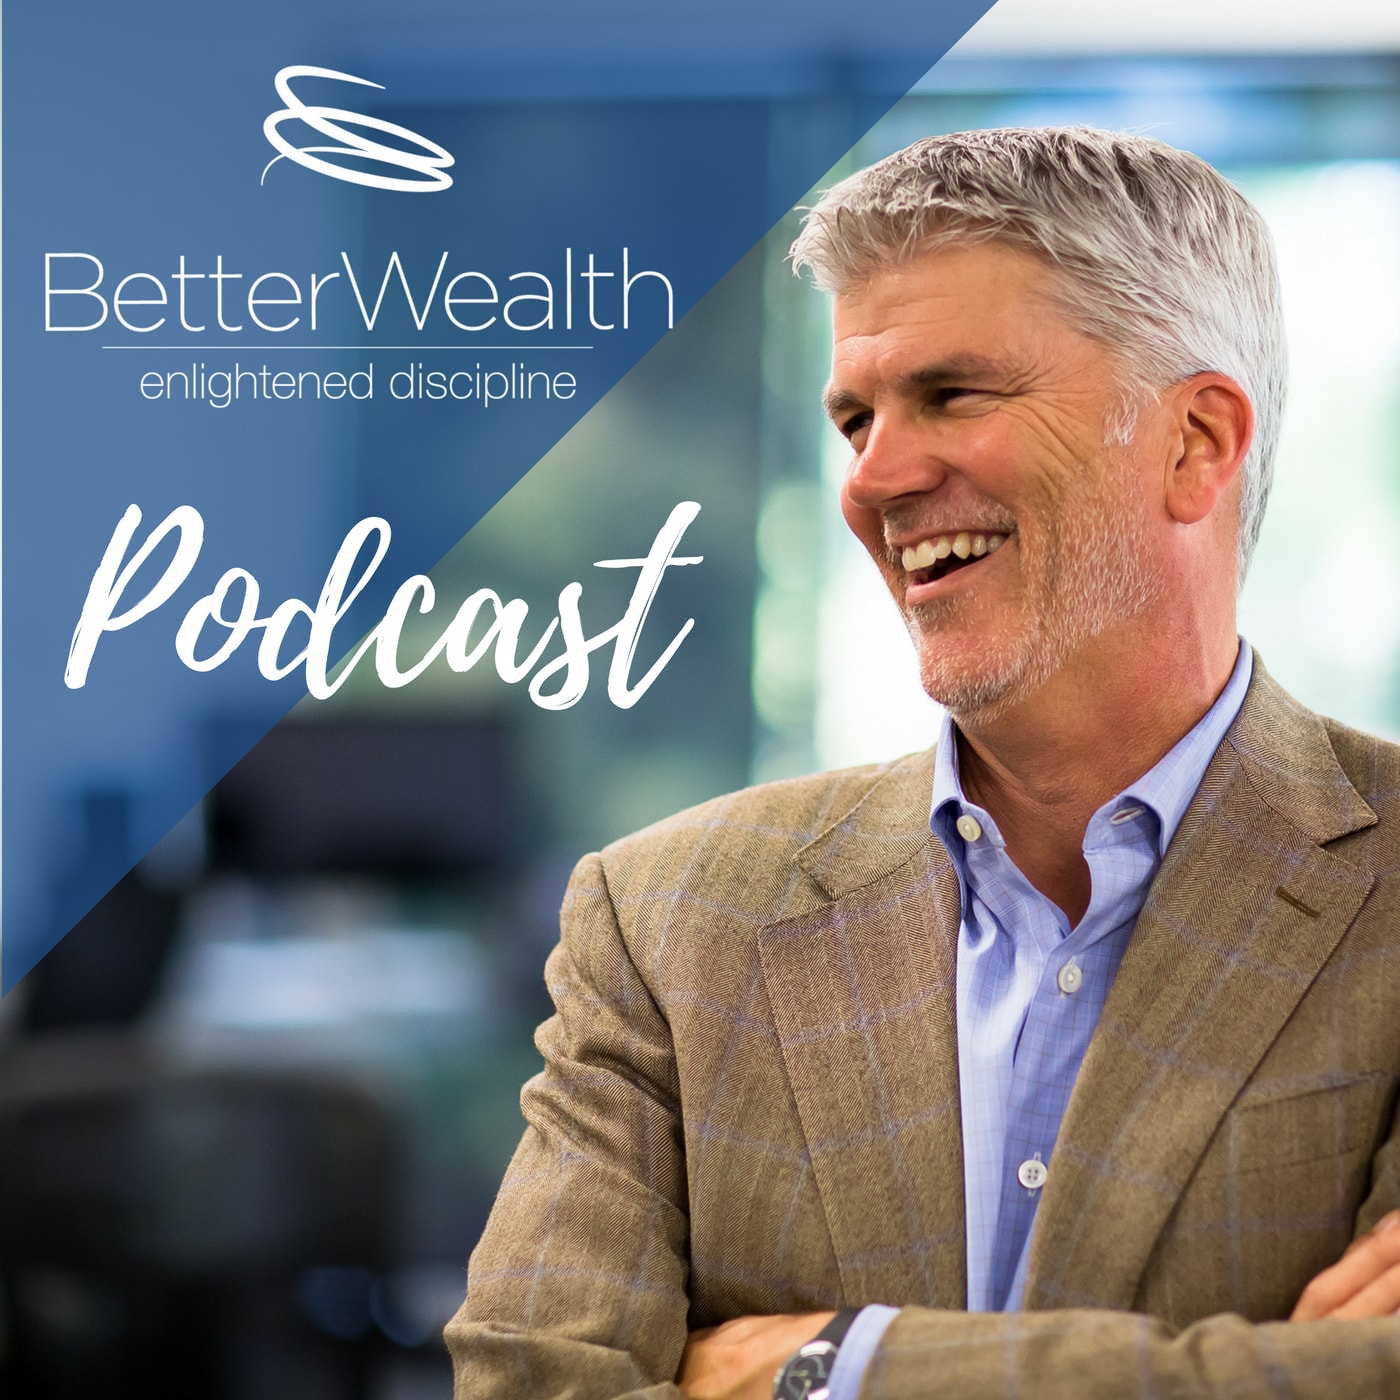 The BetterWealth Podcast